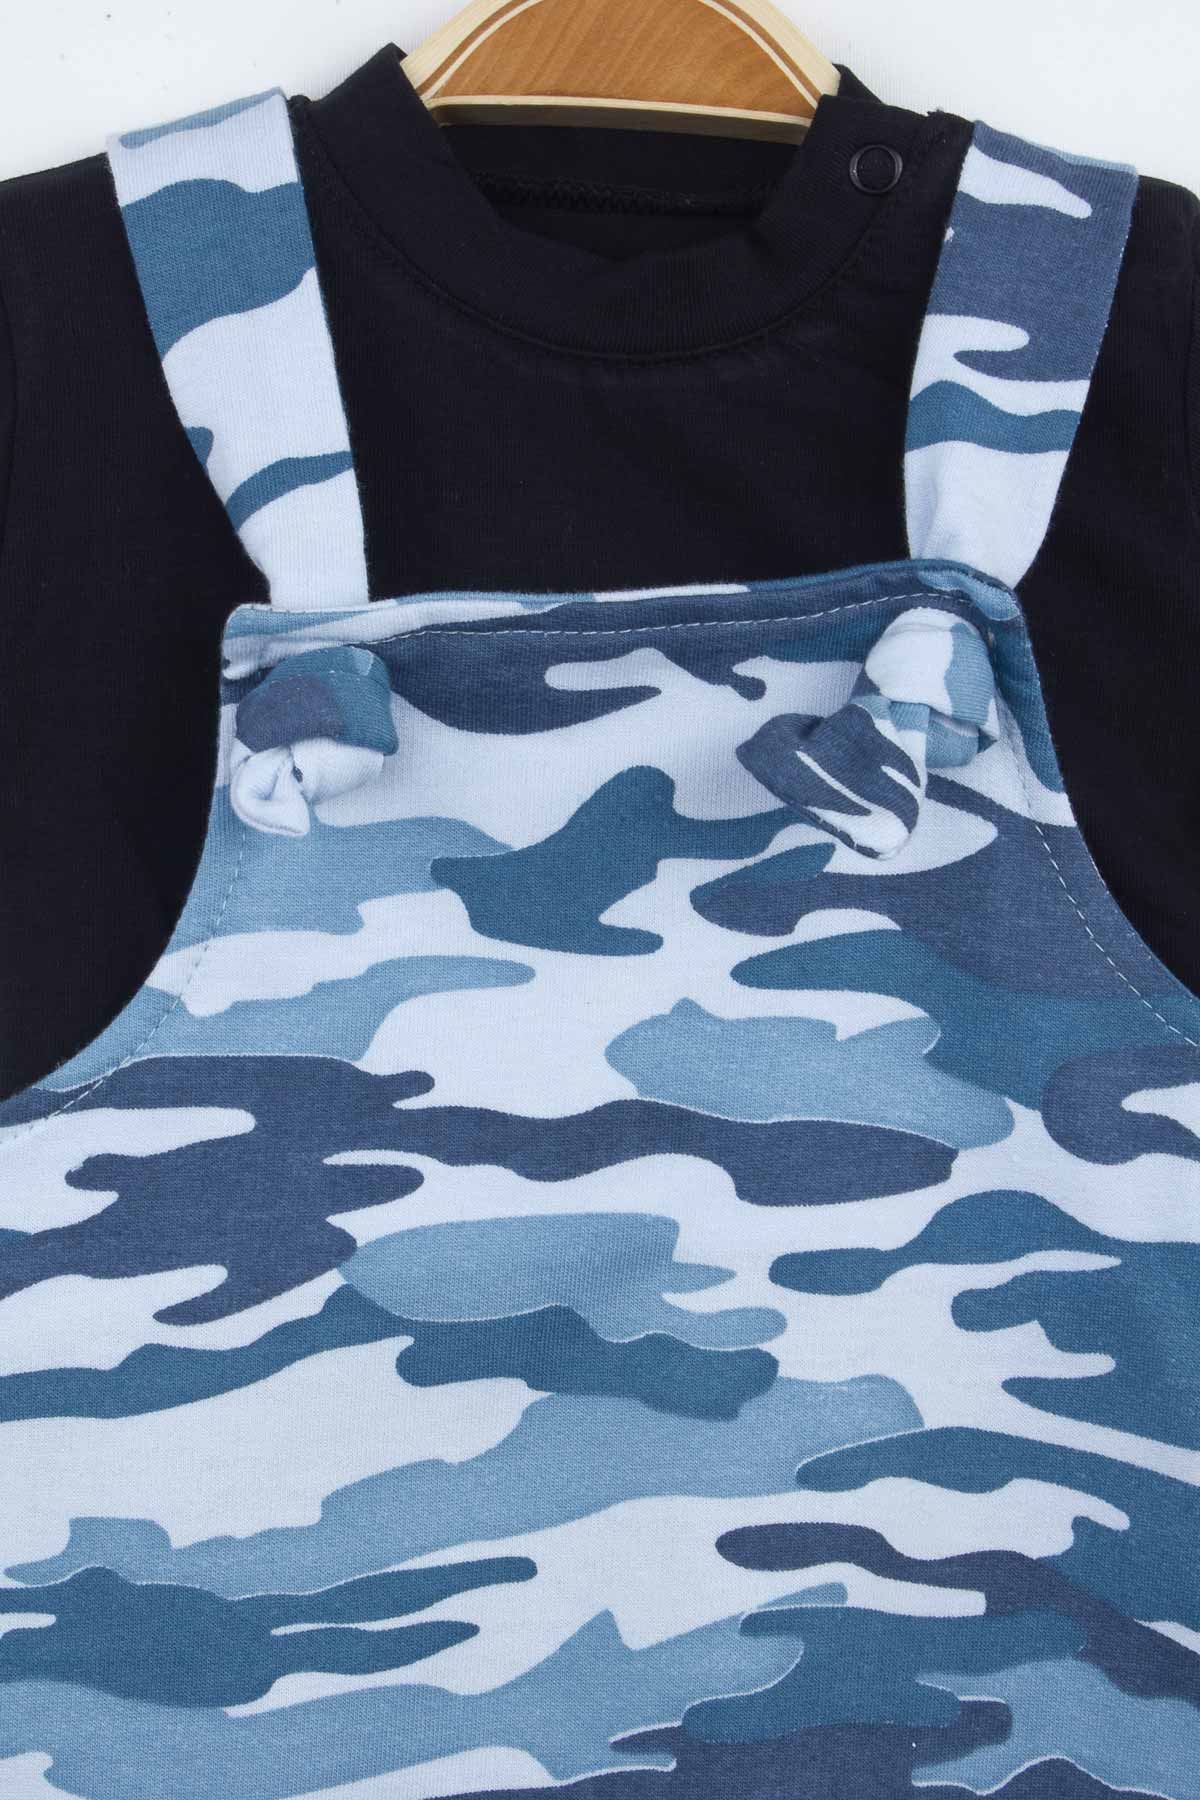 Blue camouflage Baby Boy Rompers Fashion 2021 Summer New Season Style Babies Clothes Outfit Cotton Comfortable Underwear for Boys Baby